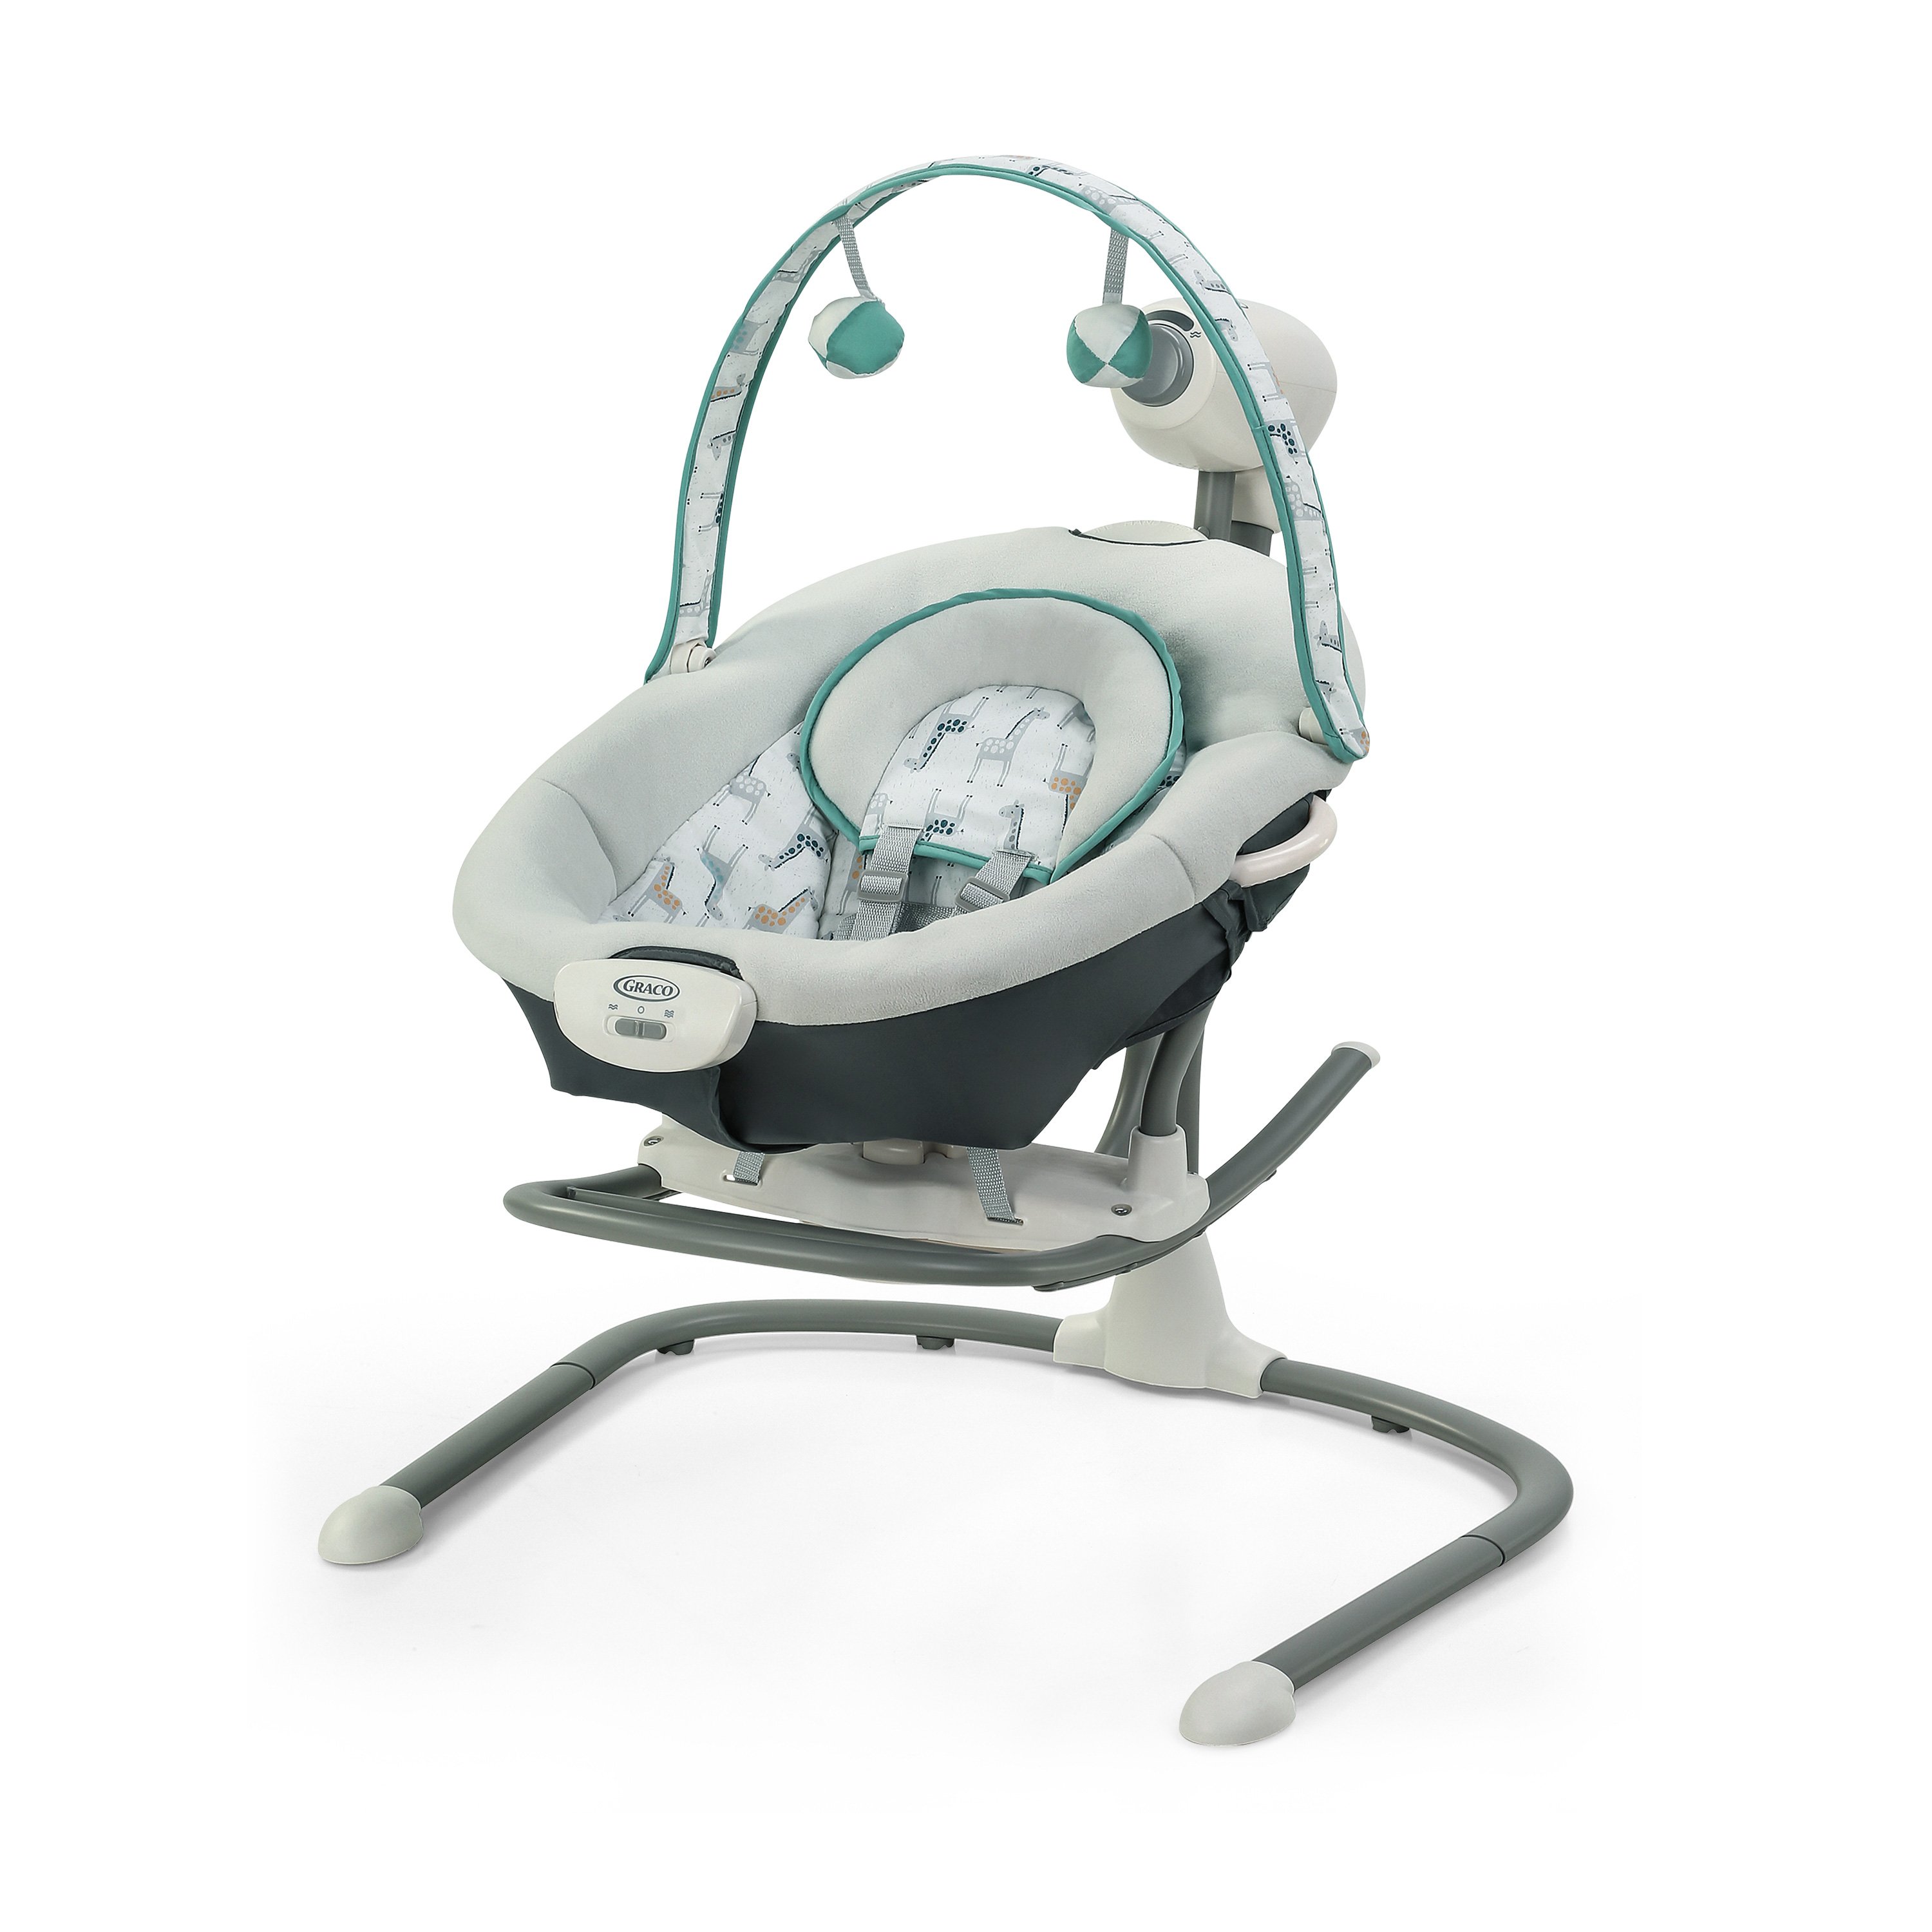 Graco Graco Duet Sway 2-in1  Baby Swing & Portable Rocker with Vibration 